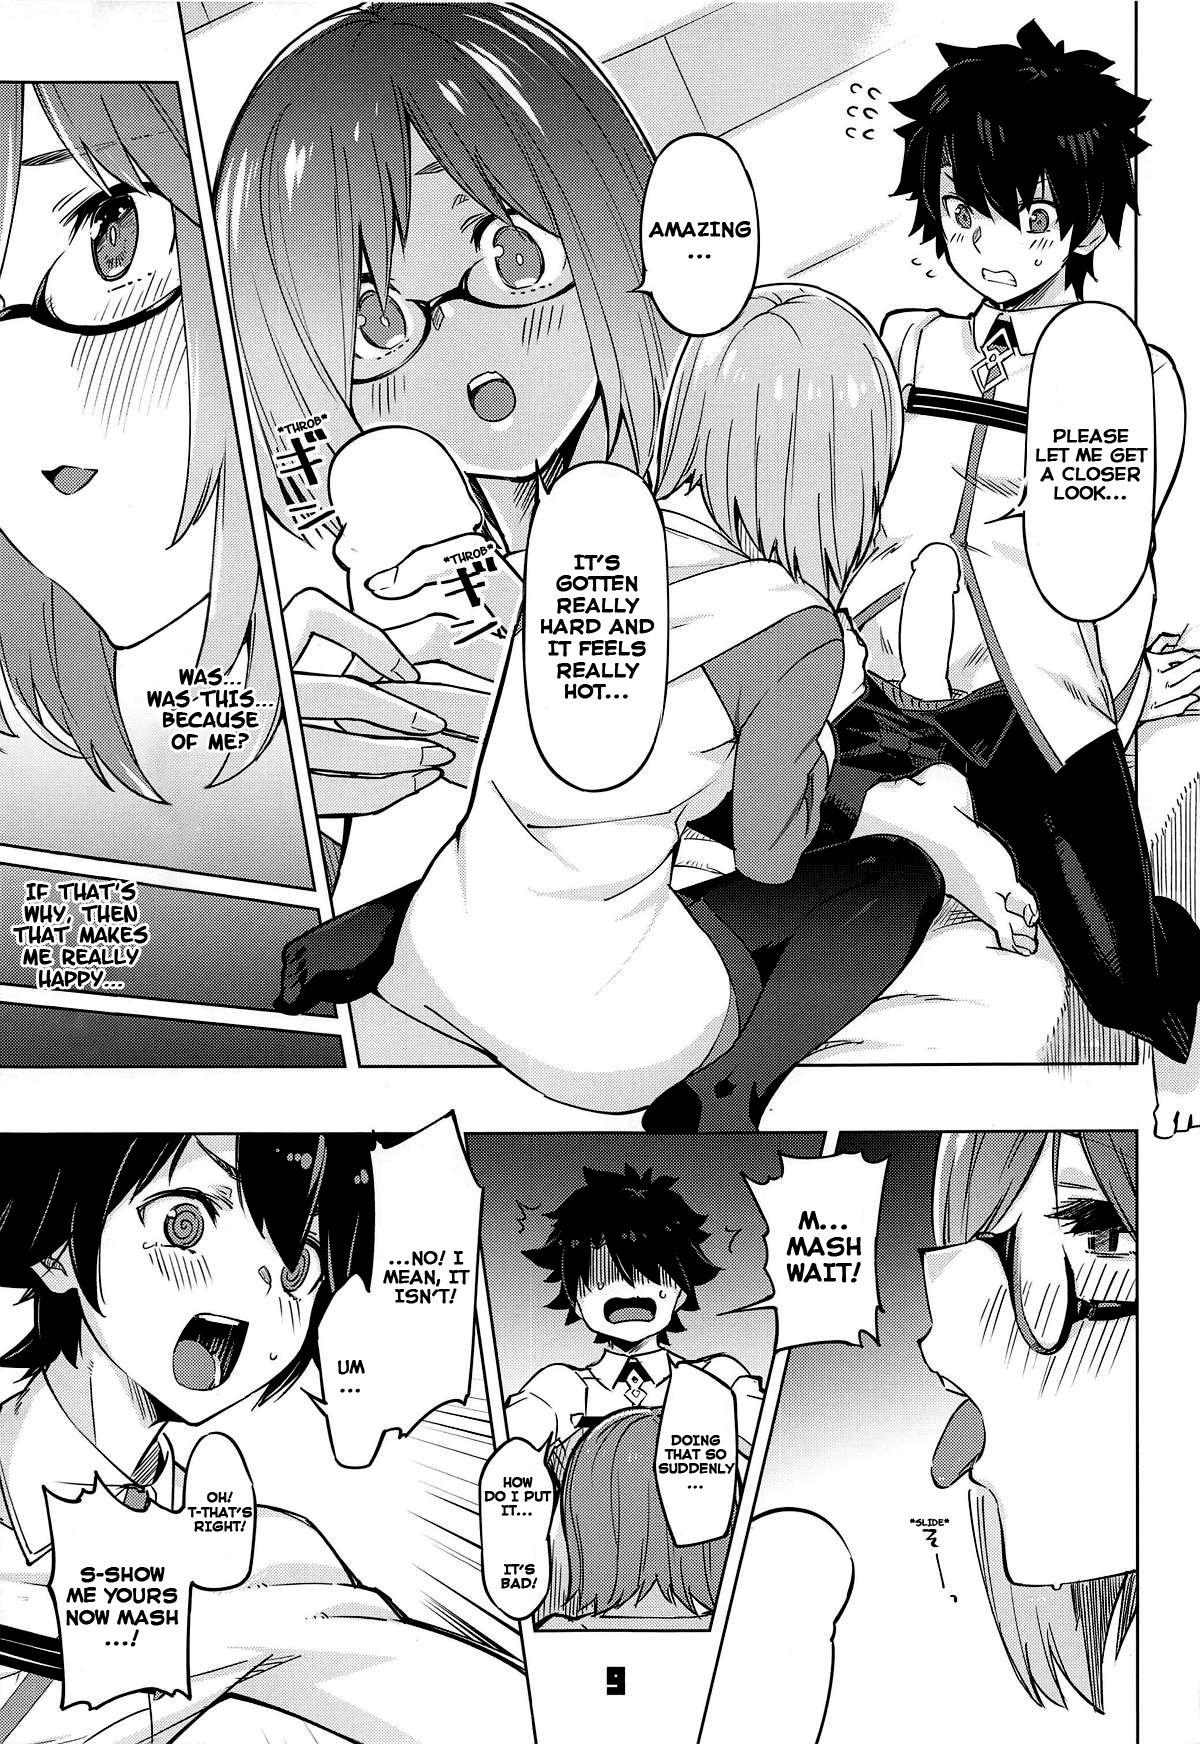 Cruising Derarenai My Room | Can't Get Out of My Room - Fate grand order Naked Sex - Page 8